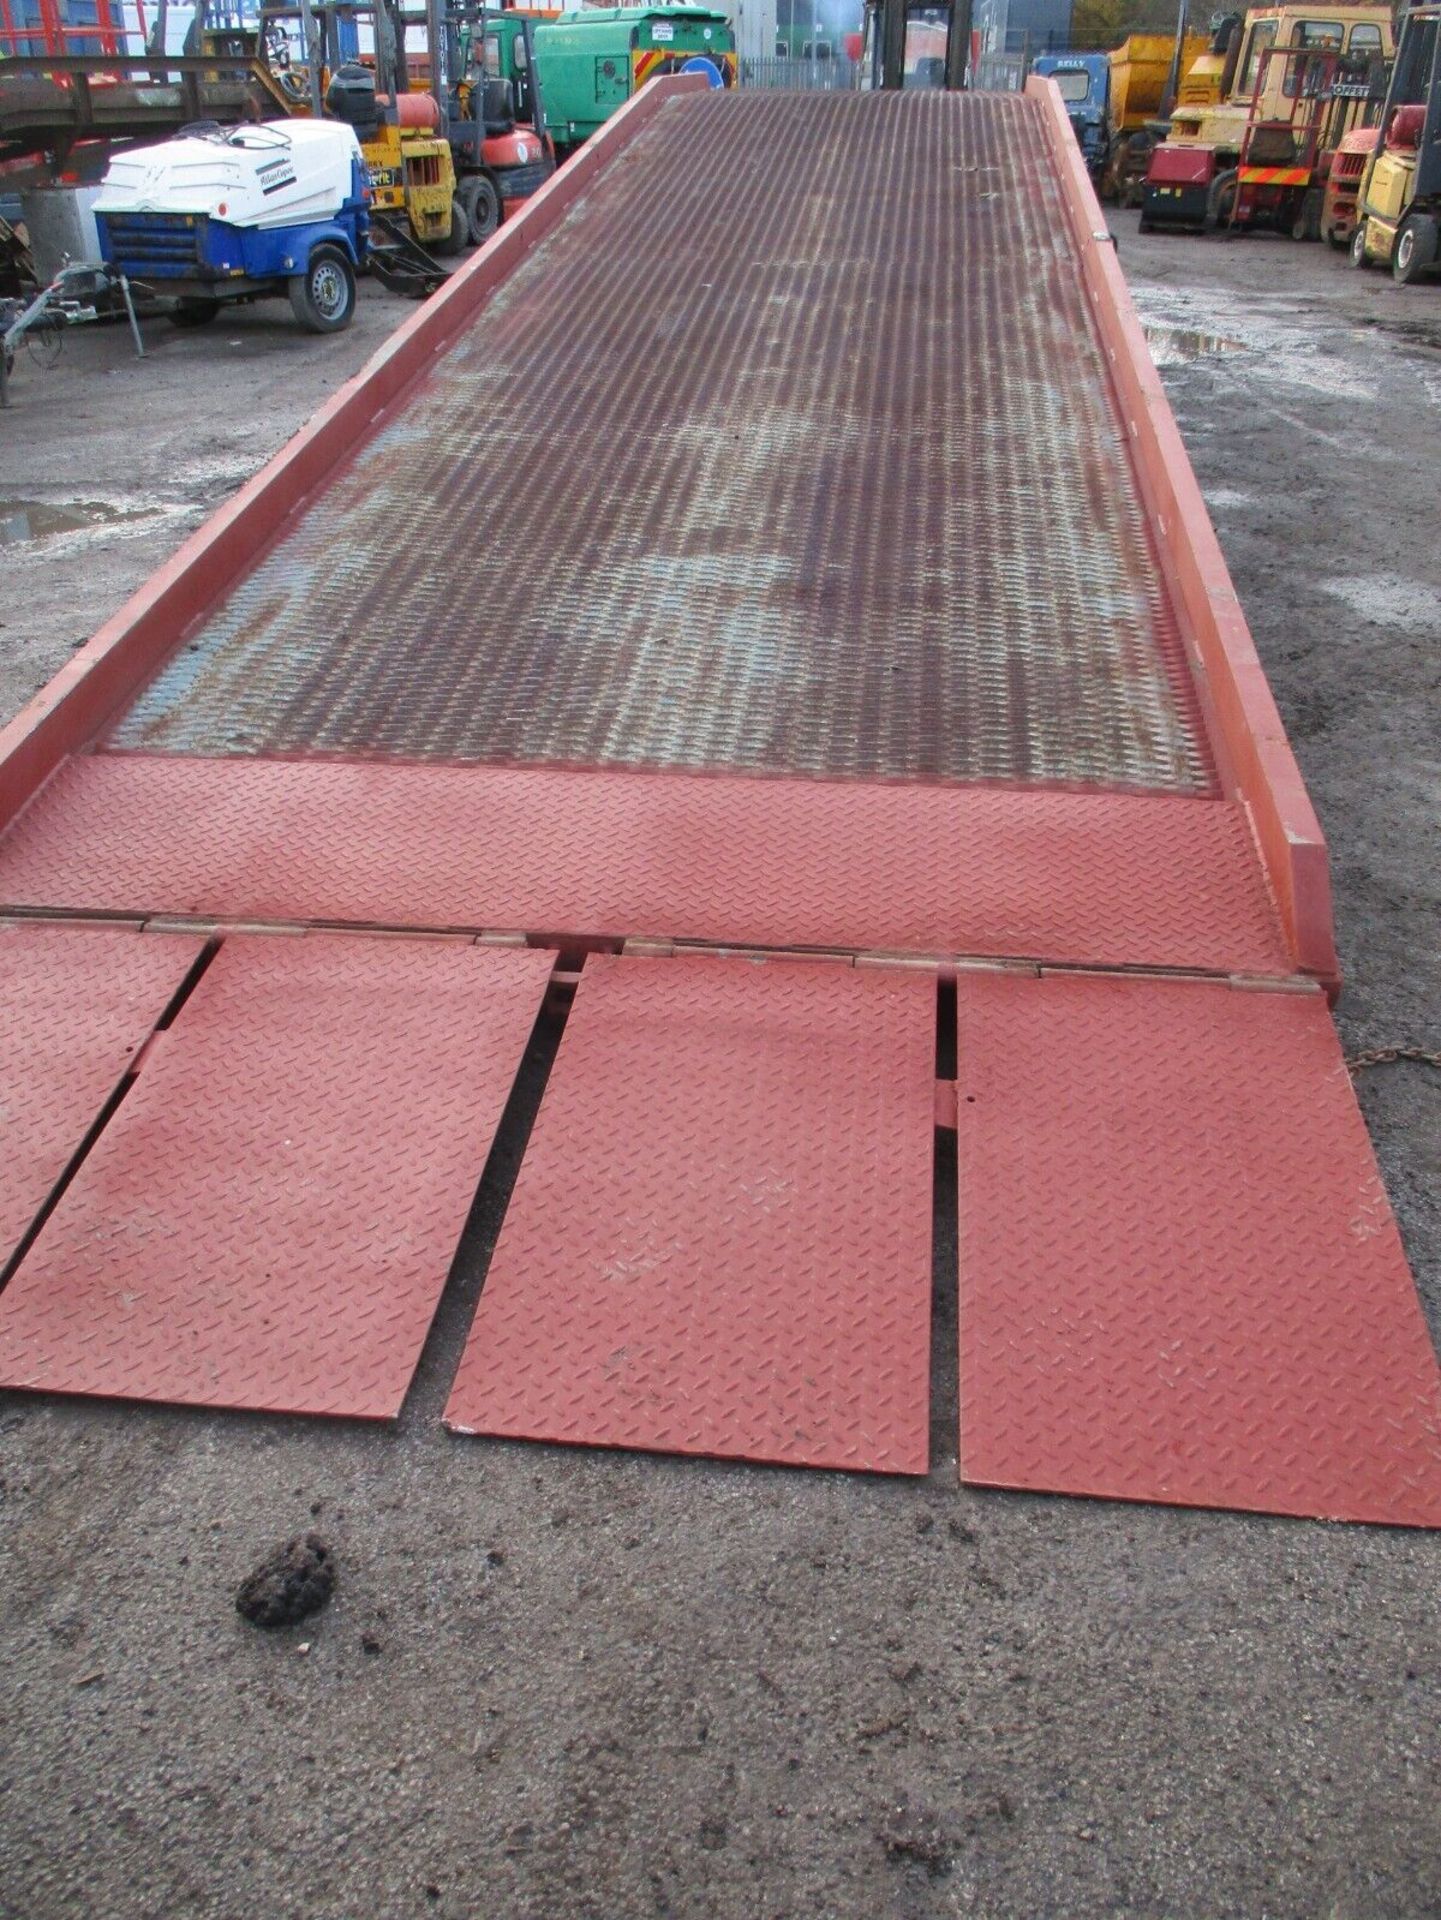 THORWORLD CONTAINER LOADING RAMP - Image 6 of 8